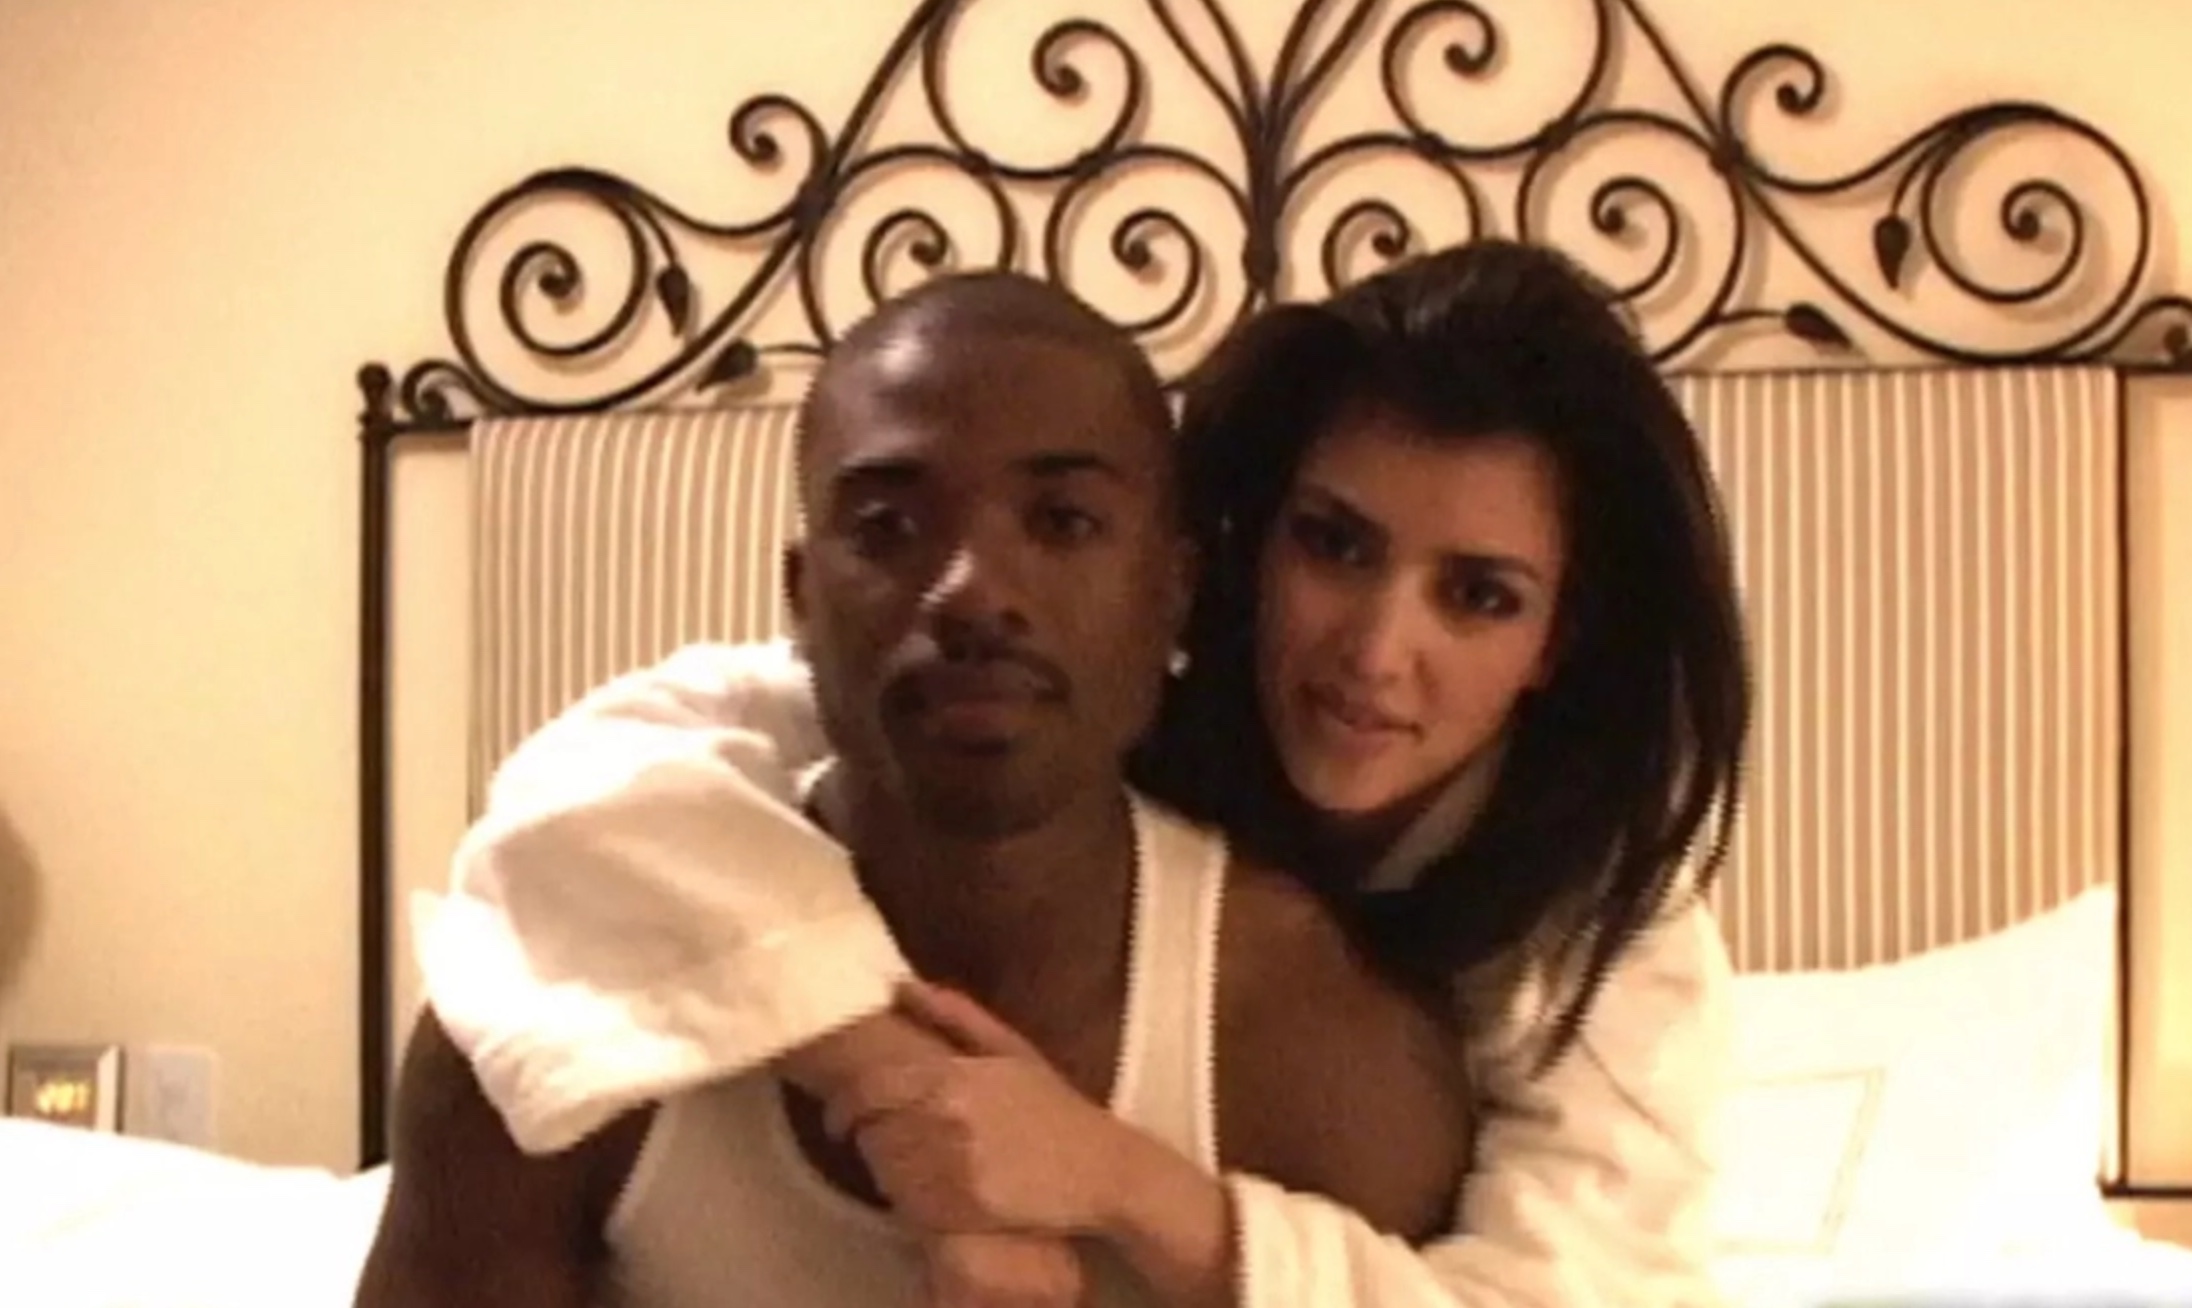 Ray J Exposes Kim Kardashian, Says Leaked Sex Tape Was Planned With Her Mother